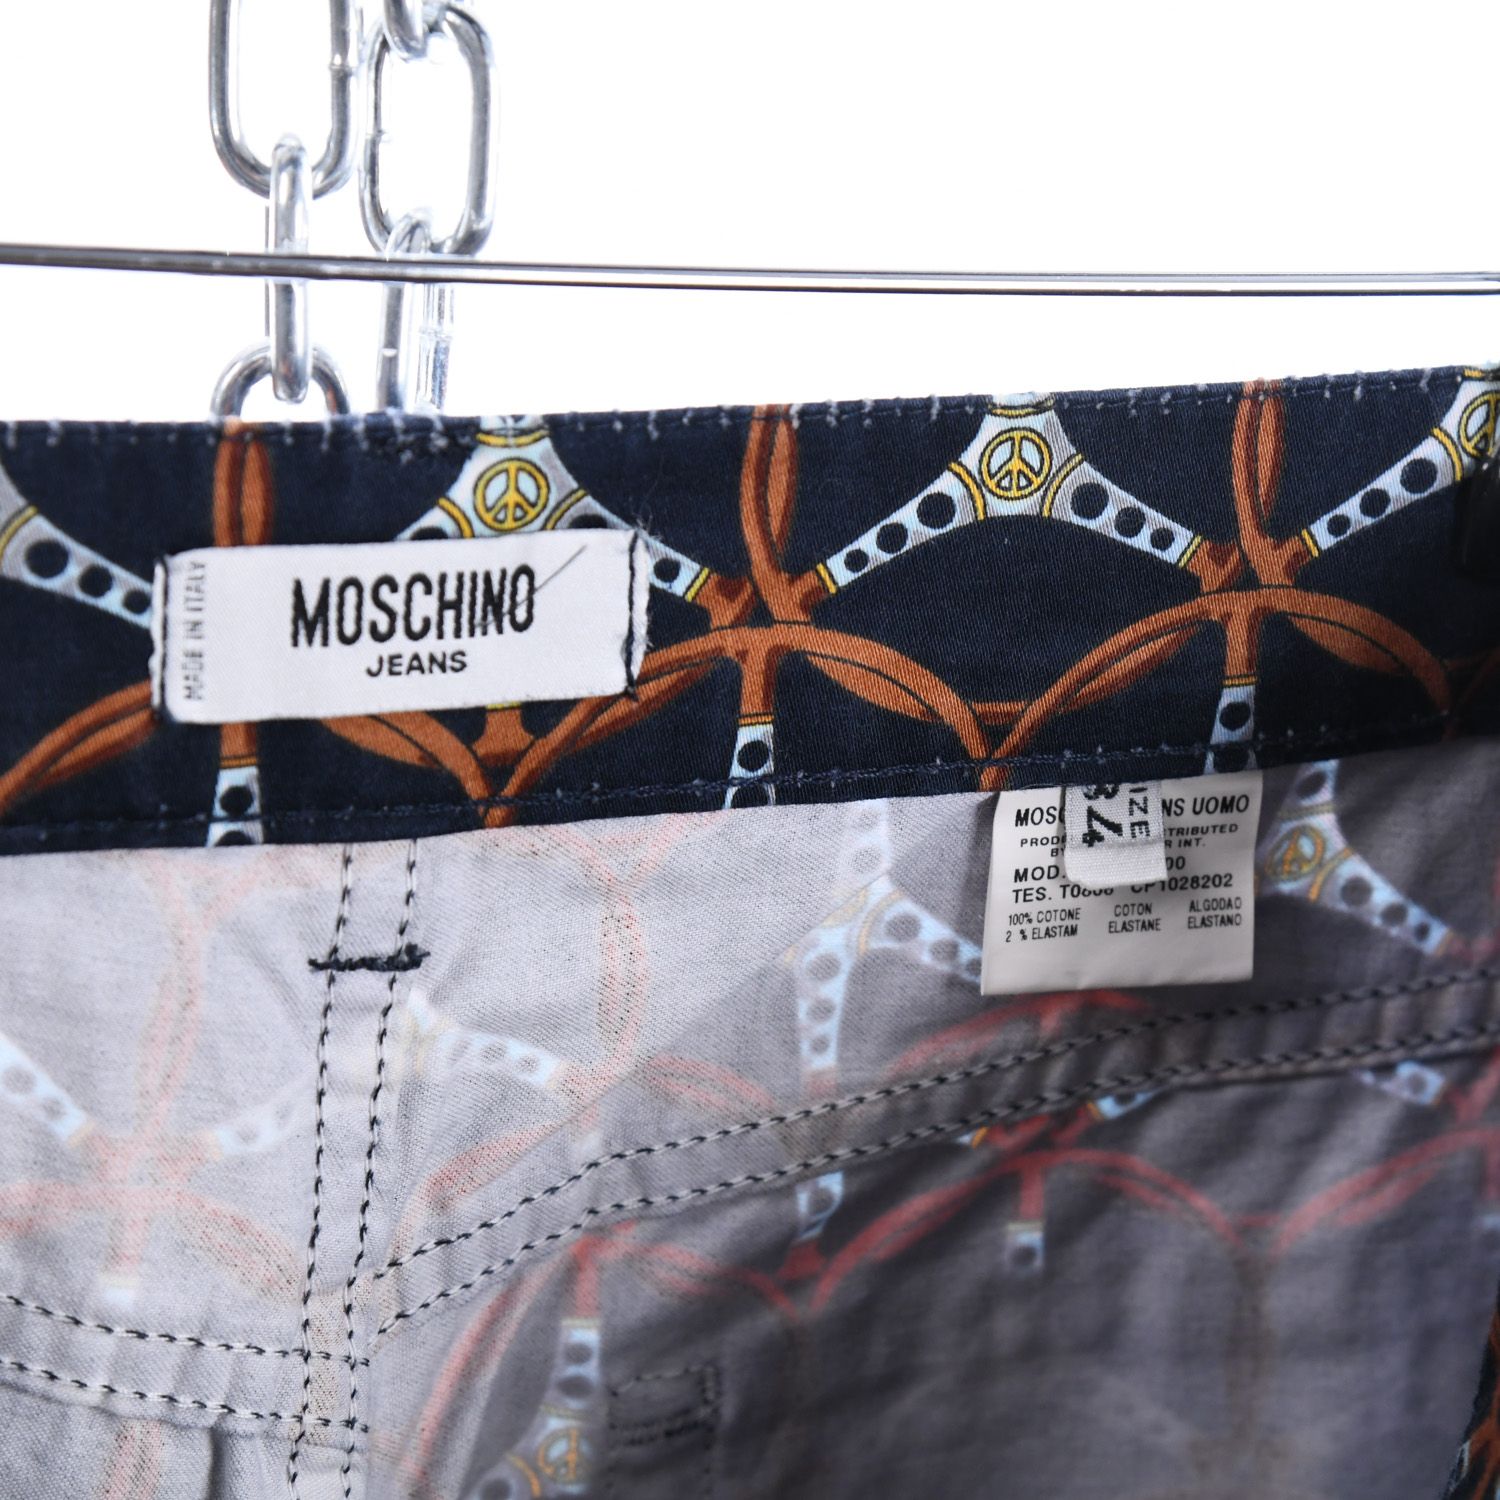 Moschino Jeans 1990s Trousers